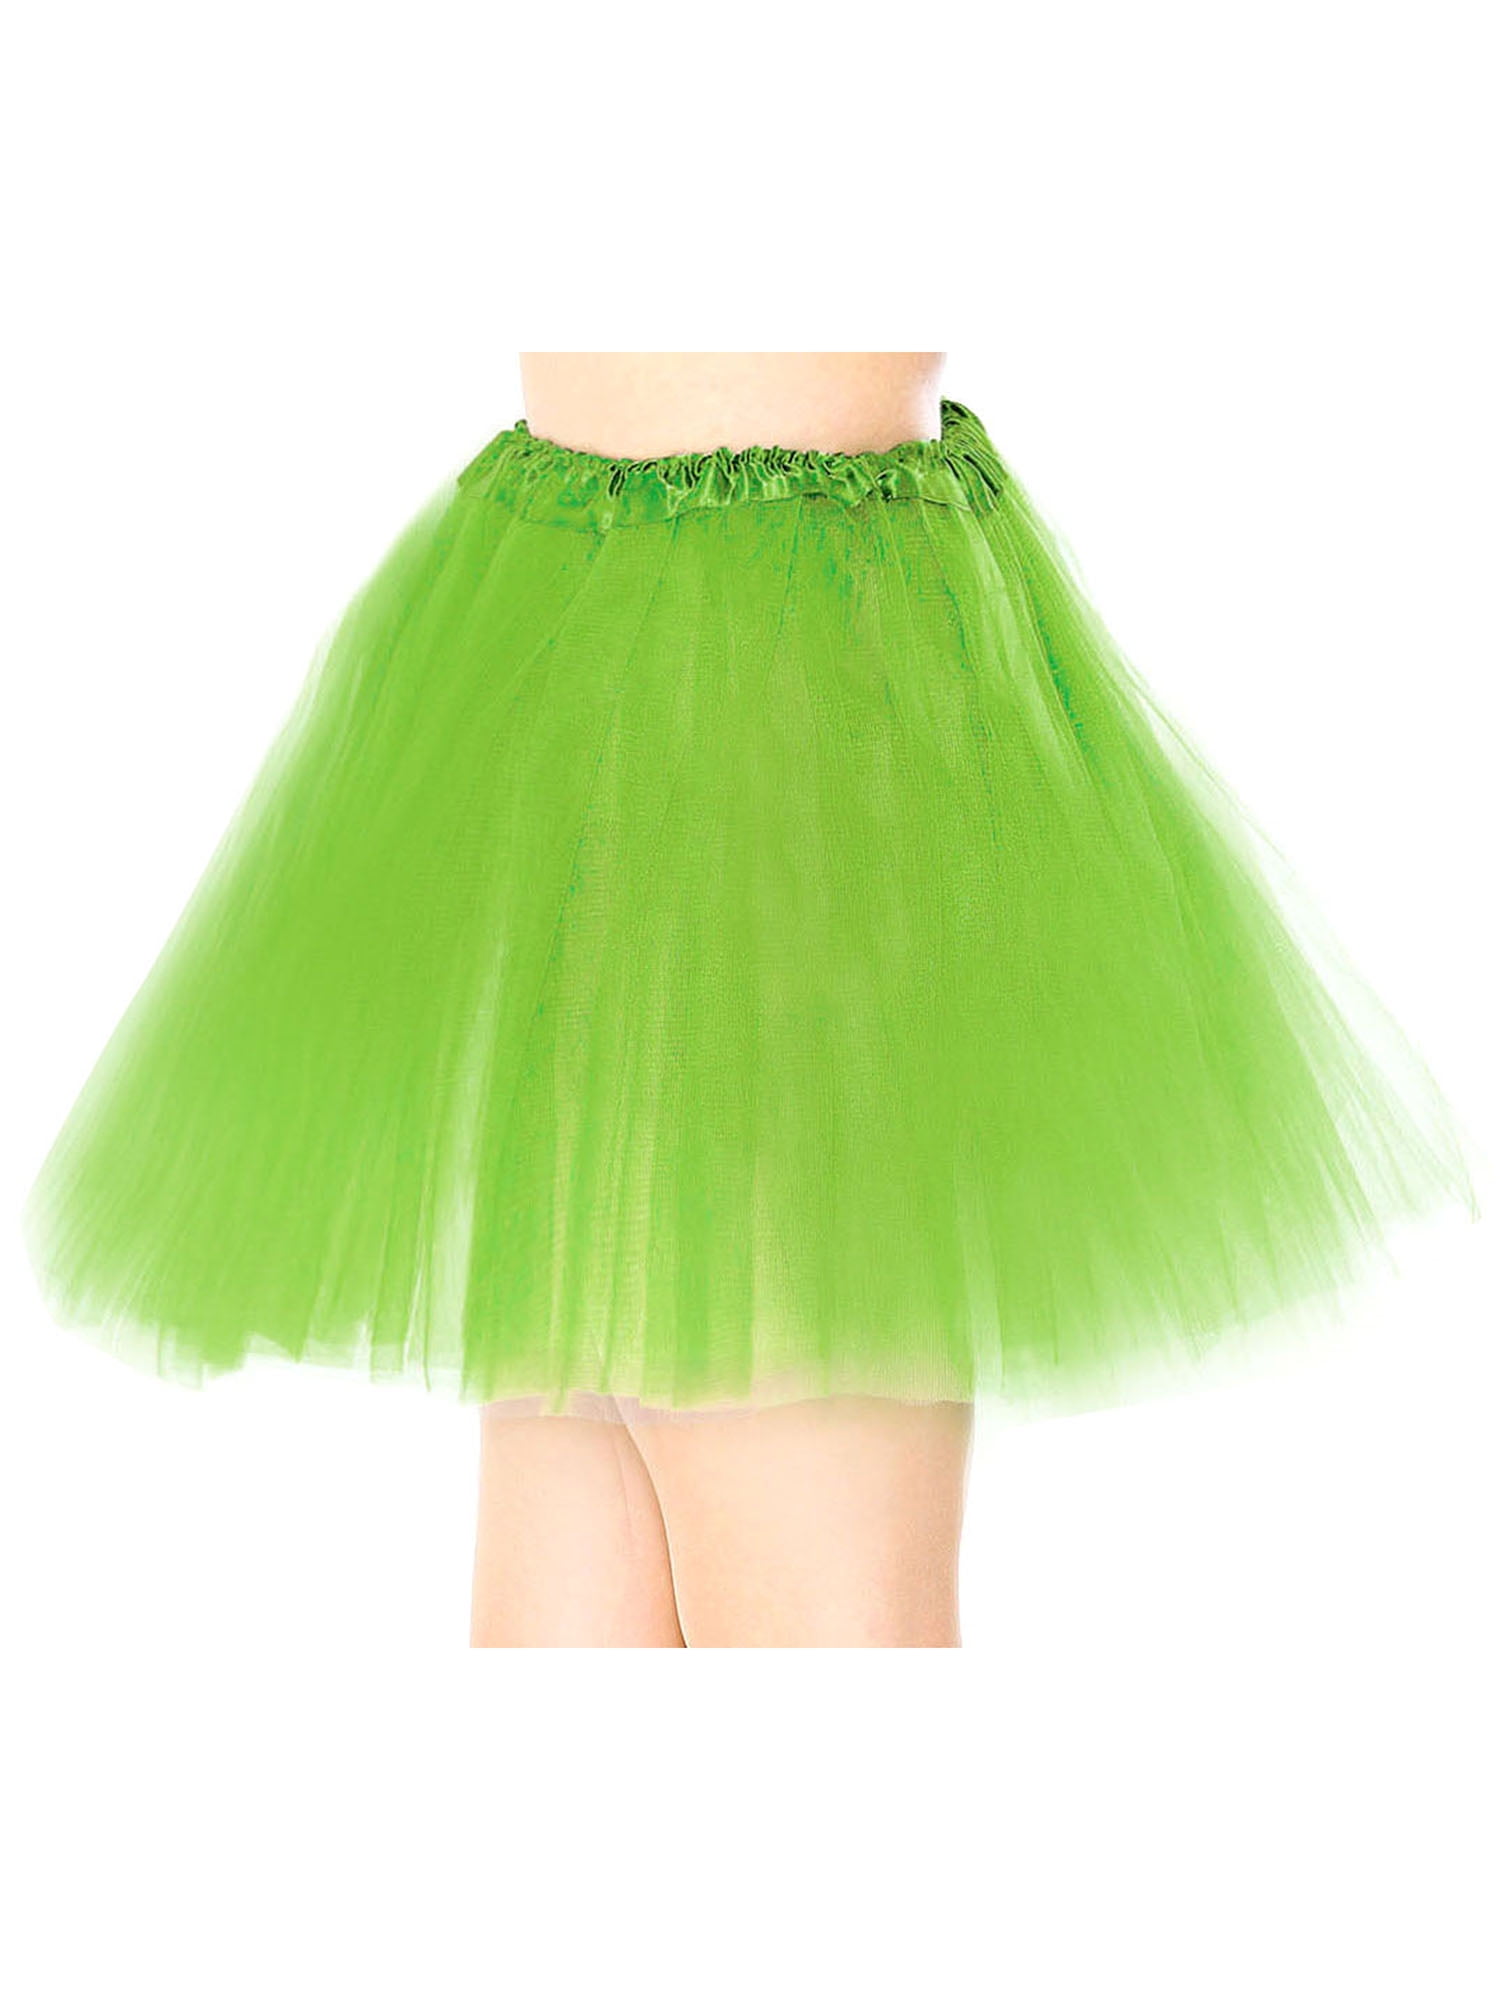 80s Women Colorful Tutu Skirt 3-Layers Fancy Dress Costume One Size Fits Most 